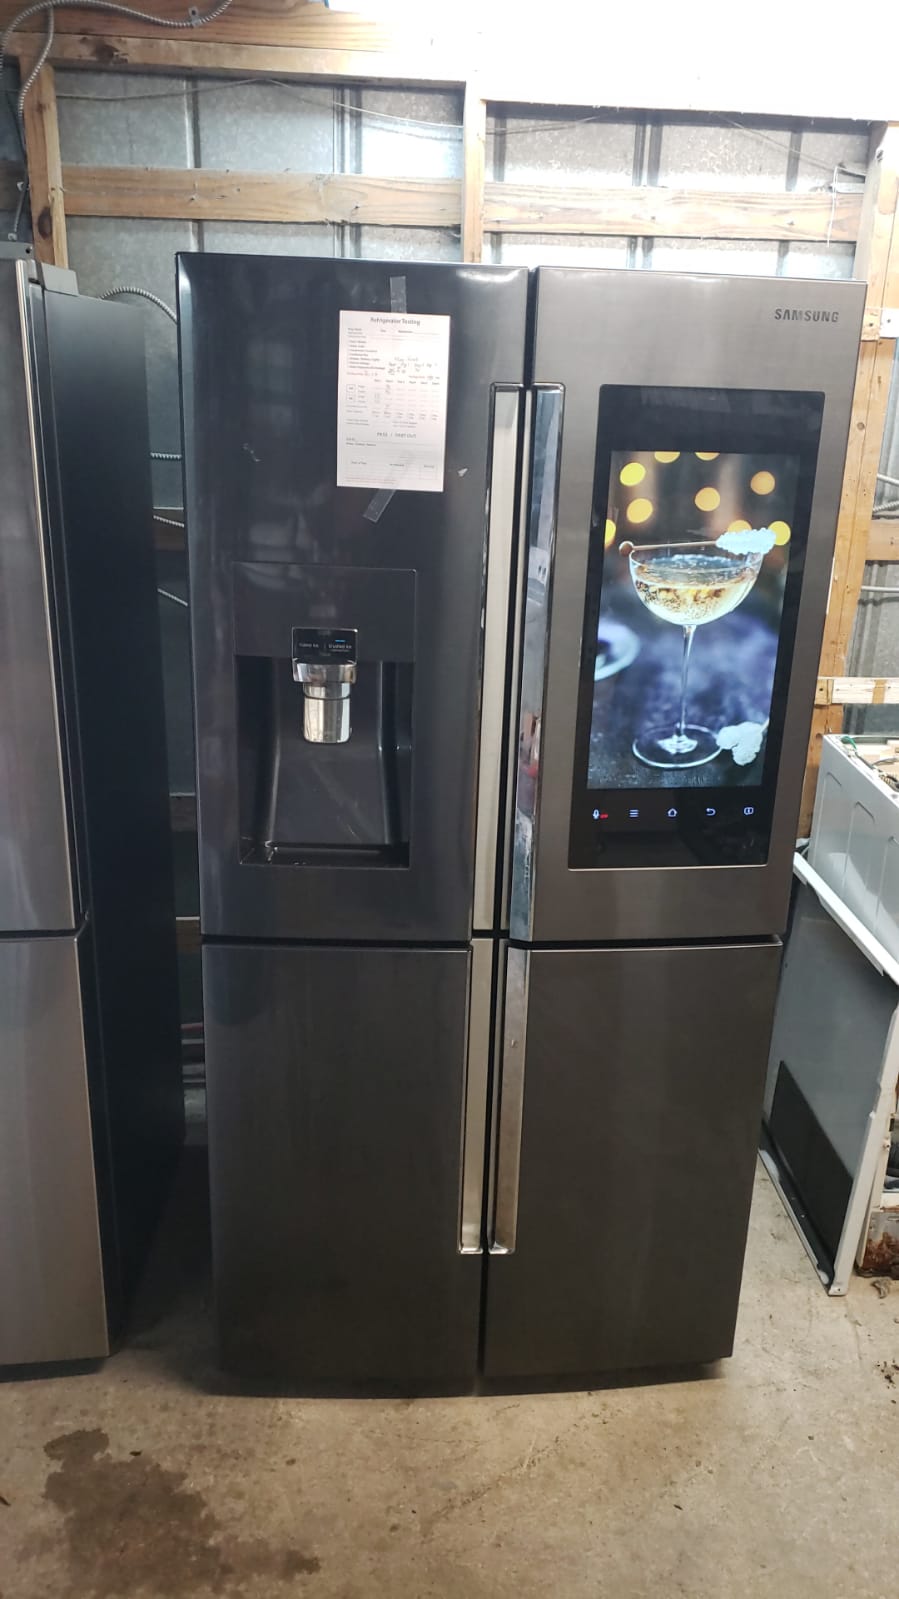 example pictures of More high-end Samsung scratch and dent refrigerators offered by the truckload.